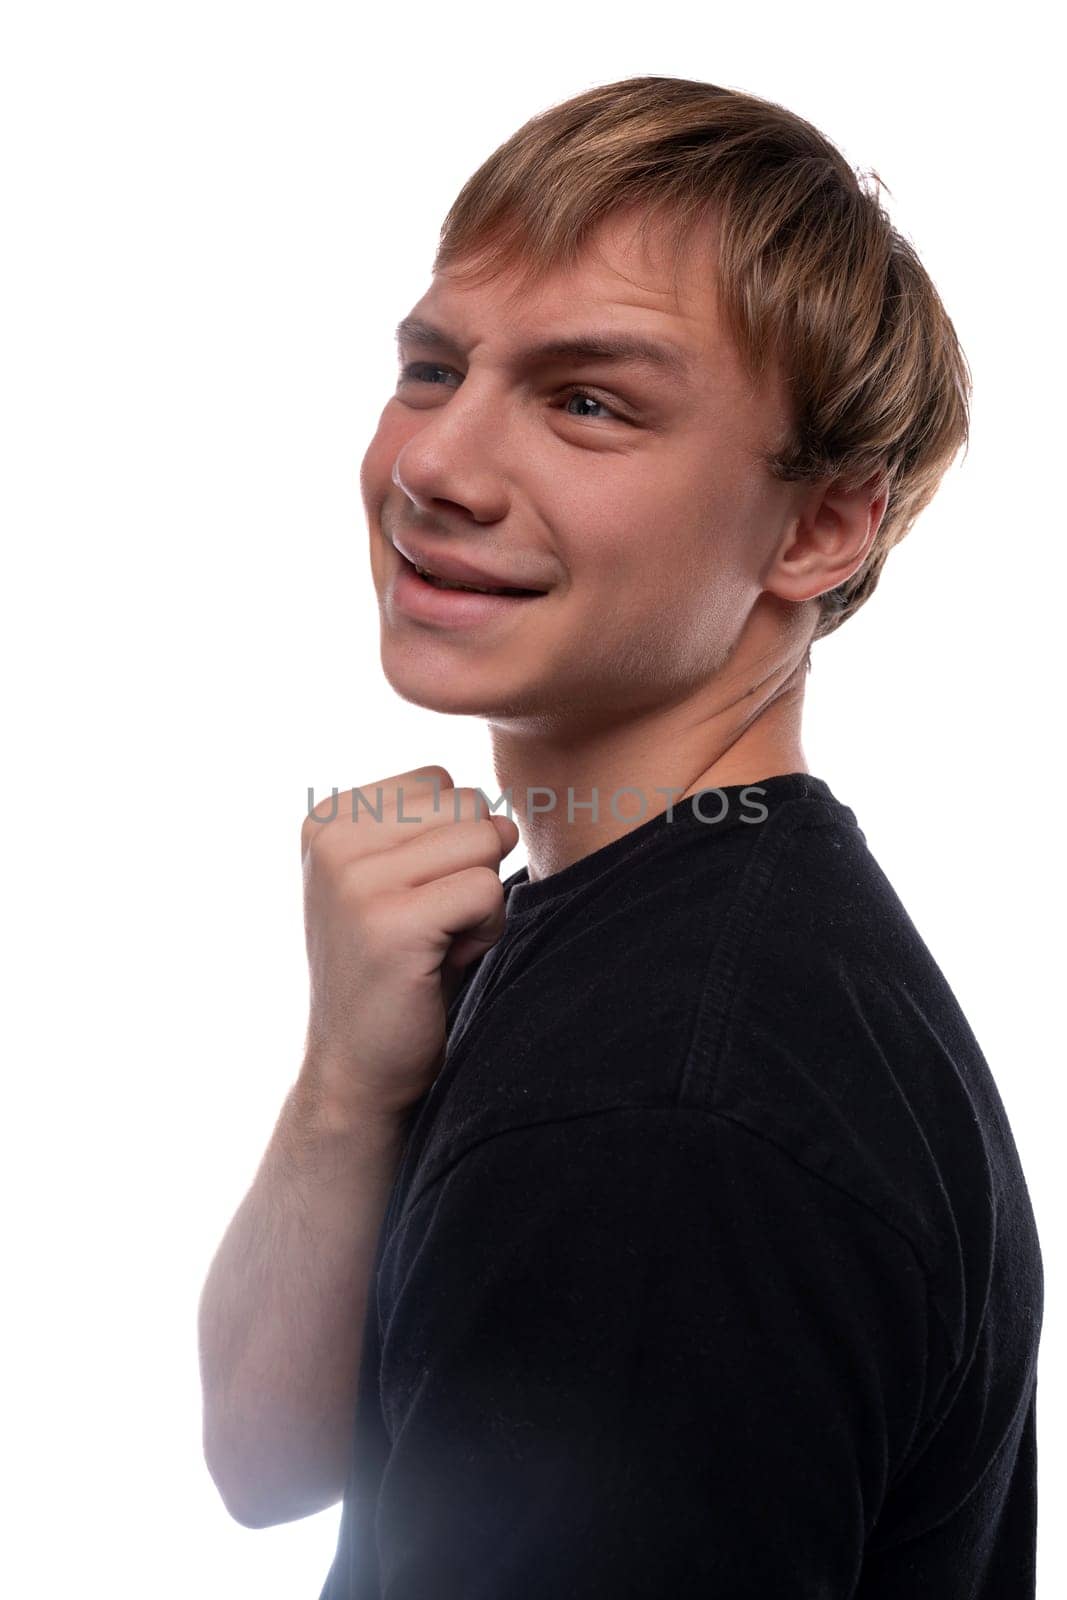 Satisfied European teenage guy with brown hair on a white background.